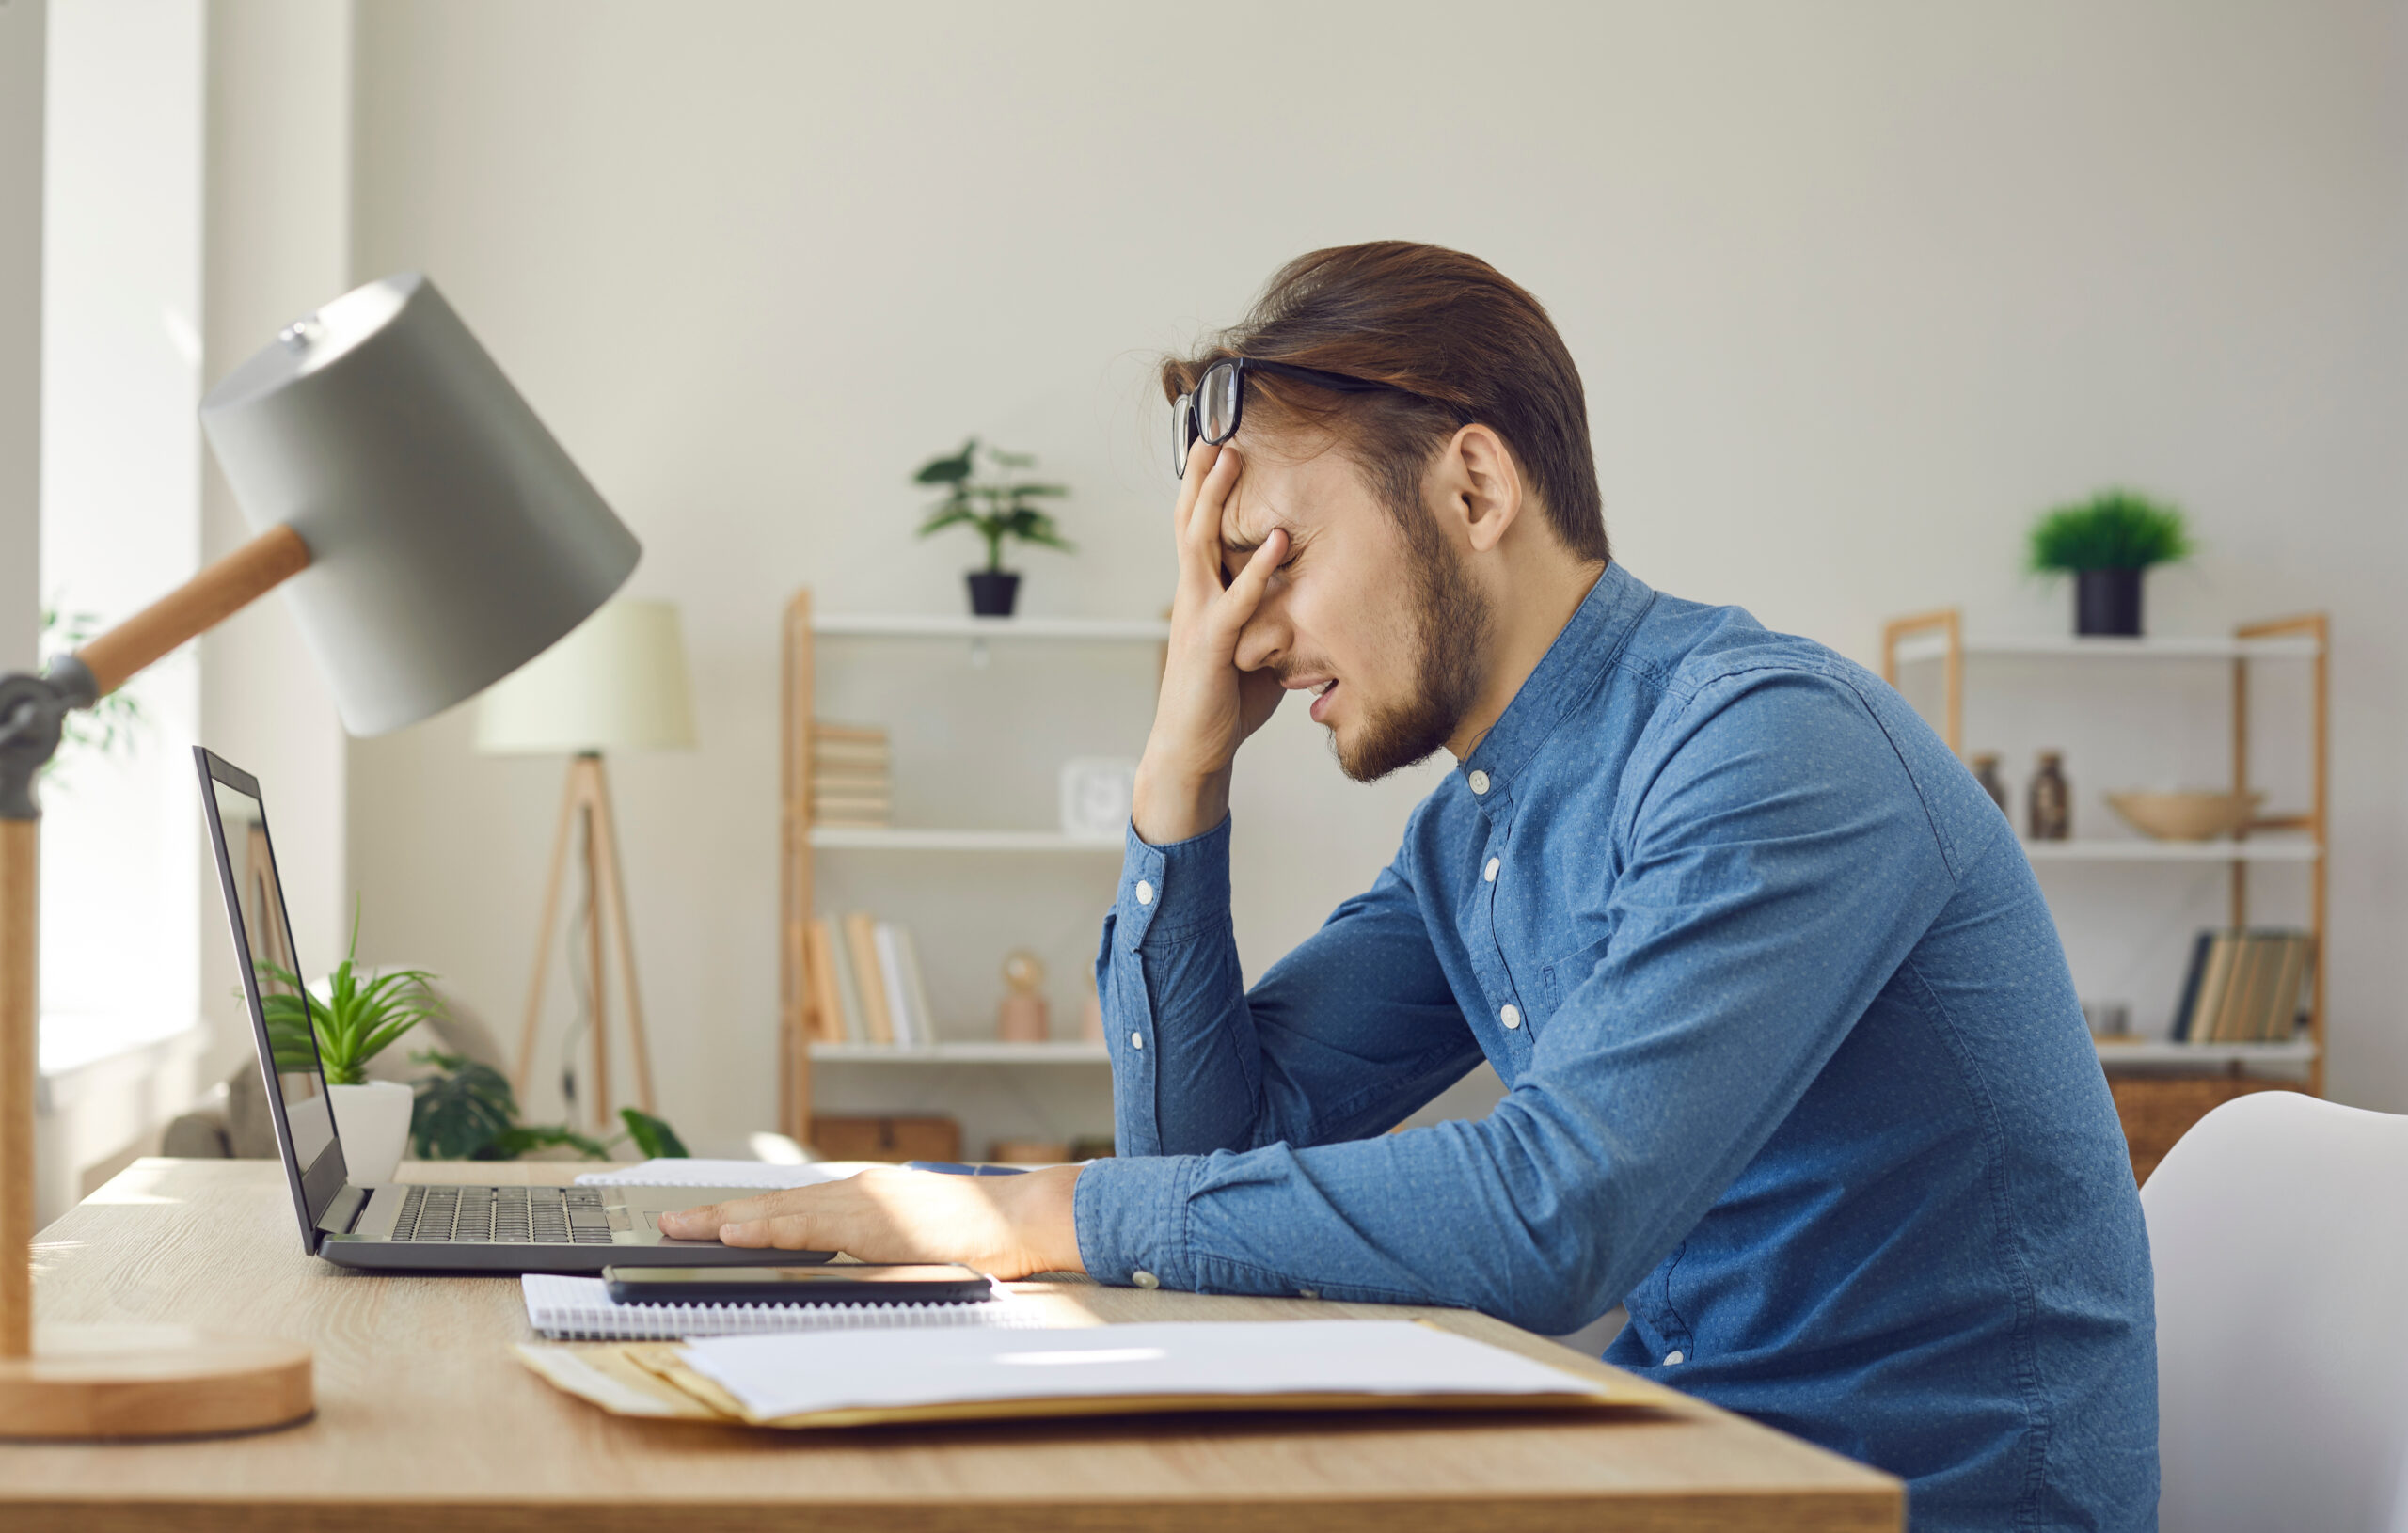 Tired worker having problem. Man makes dumb mistake or has difficulty with digital file. Side view of upset stressed young guy facepalming sitting at working desk with laptop computer in home office